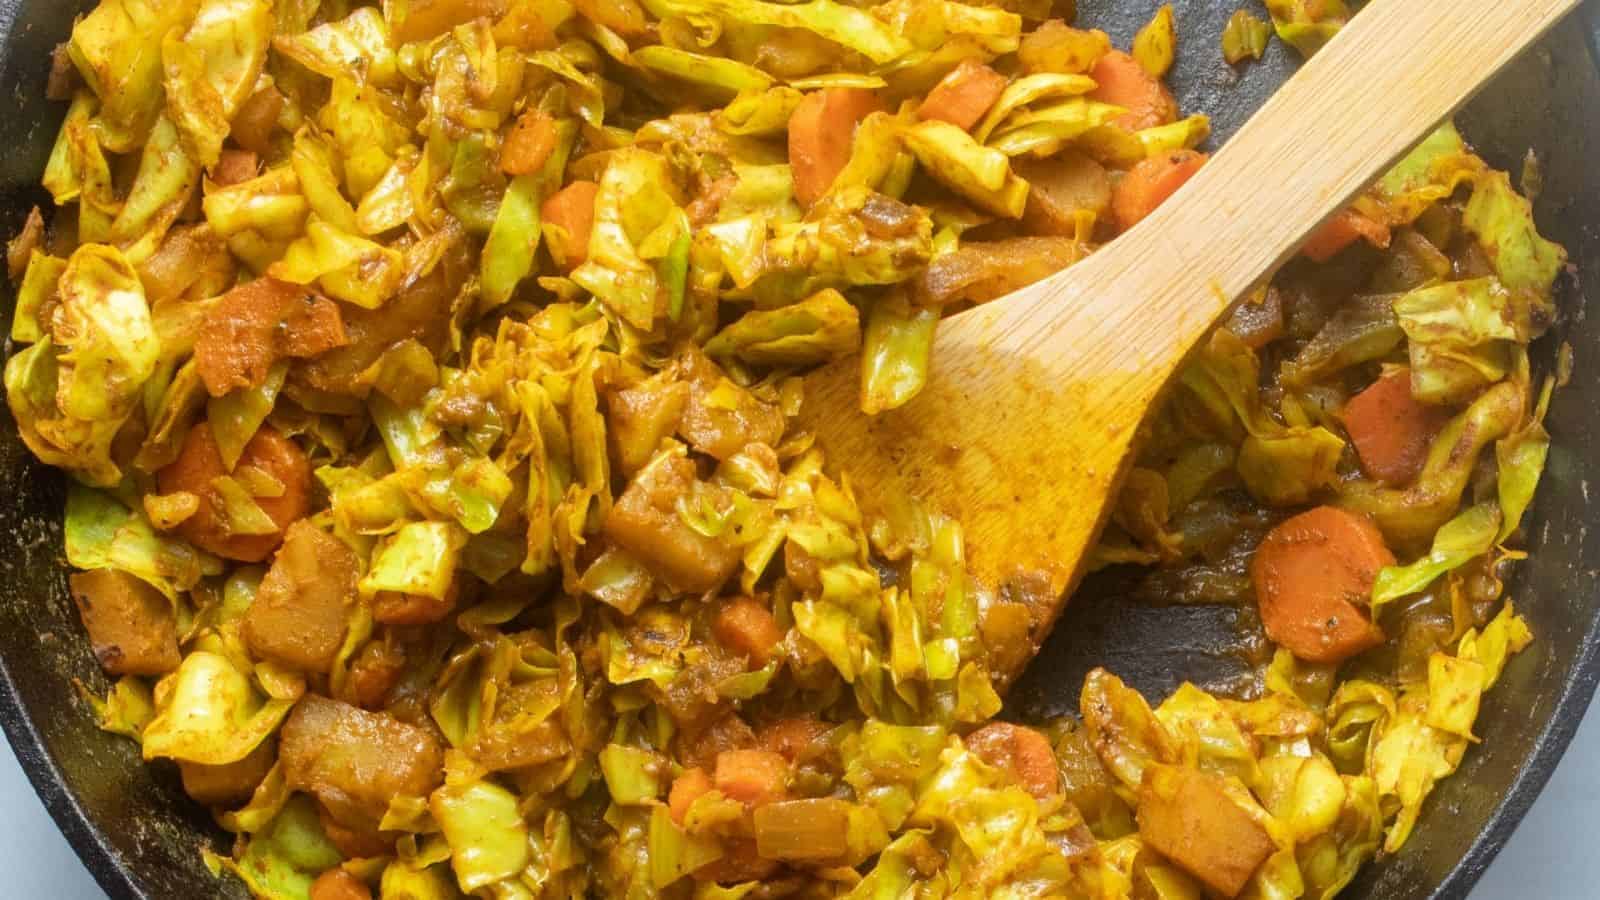 A close up image of cooked Ethiopian cabbage in a skillet pan with a wooden serving spoon mixing the dish.